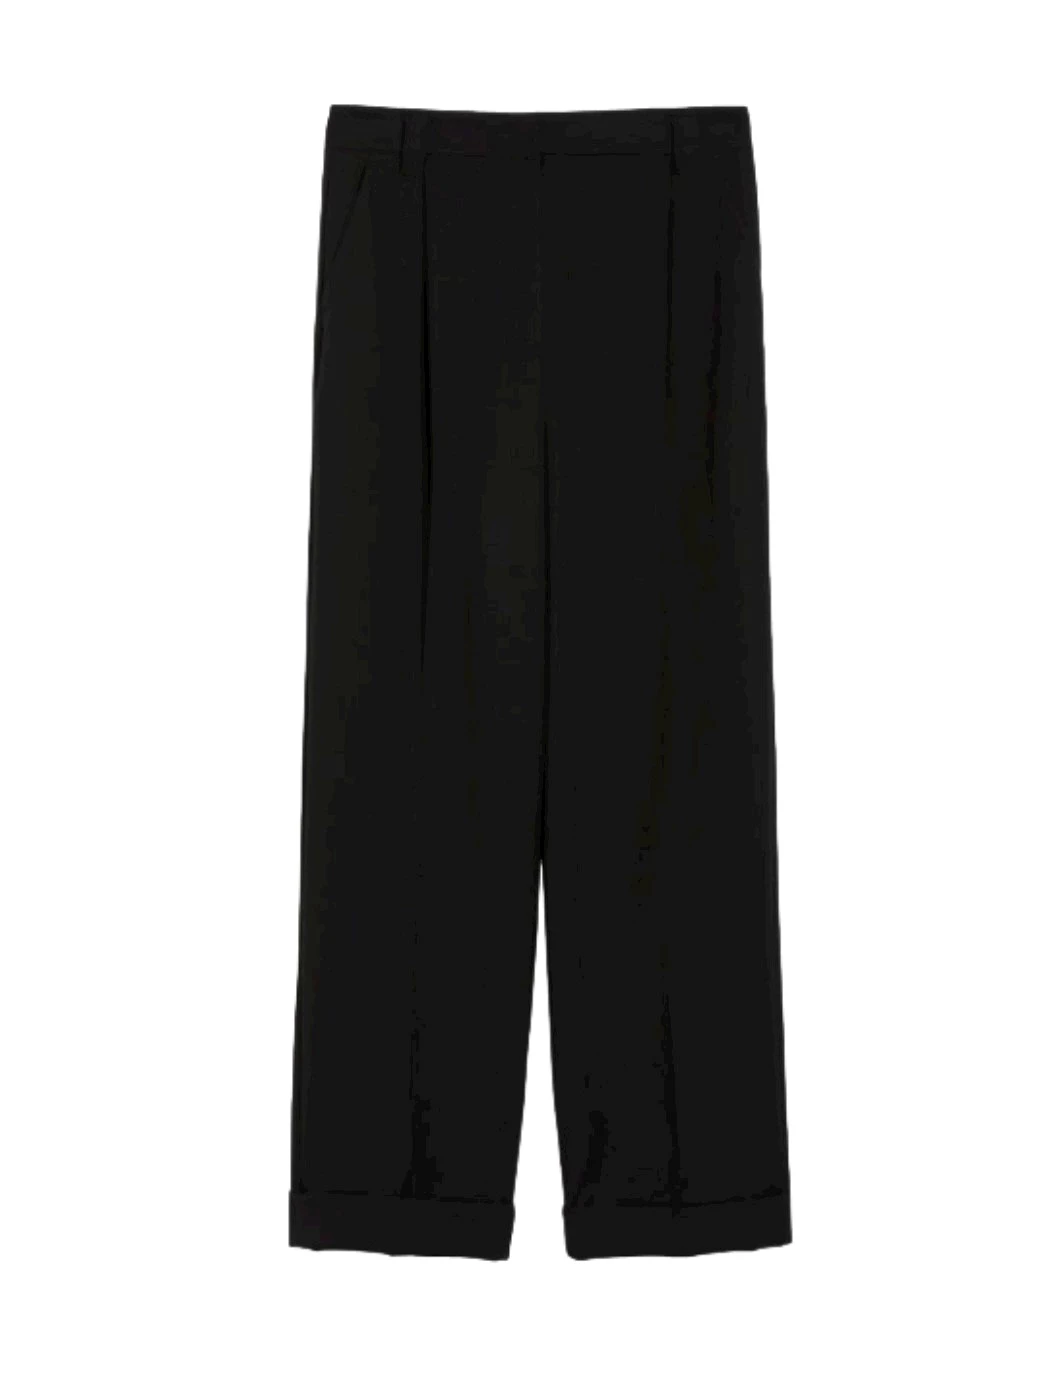 IBlues Trousers